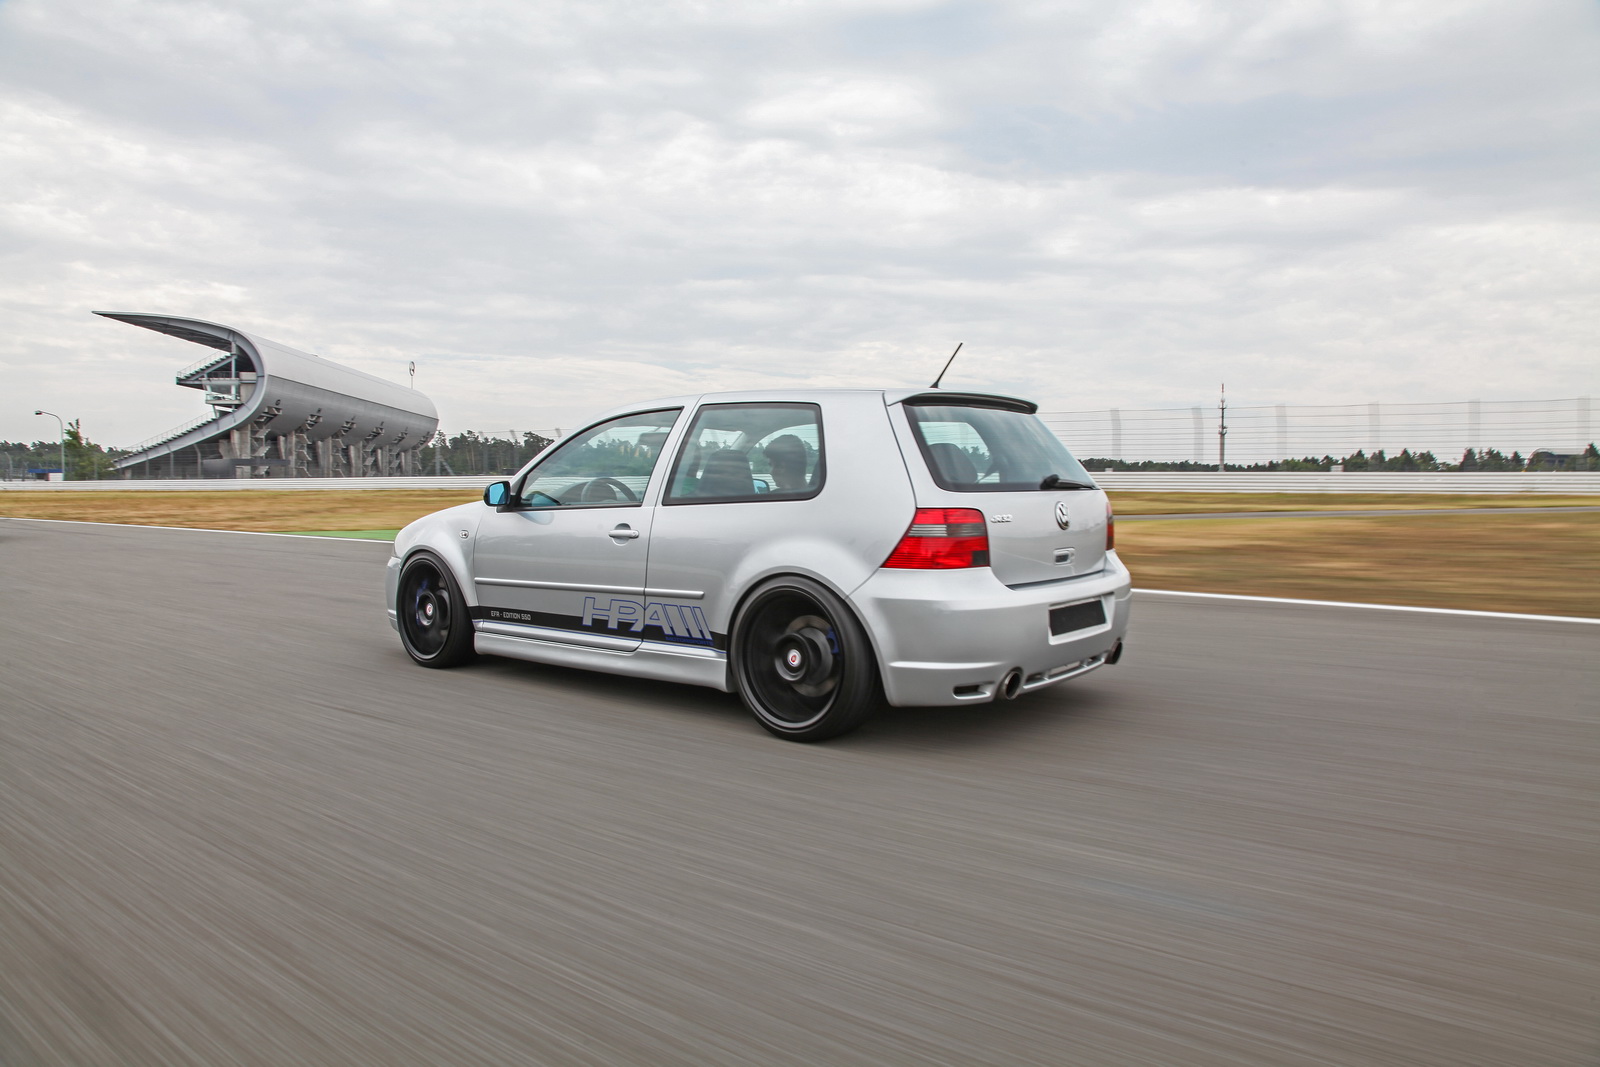 HPerformance Transforms A Golf 4 R32 Into A Serious Powerhouse